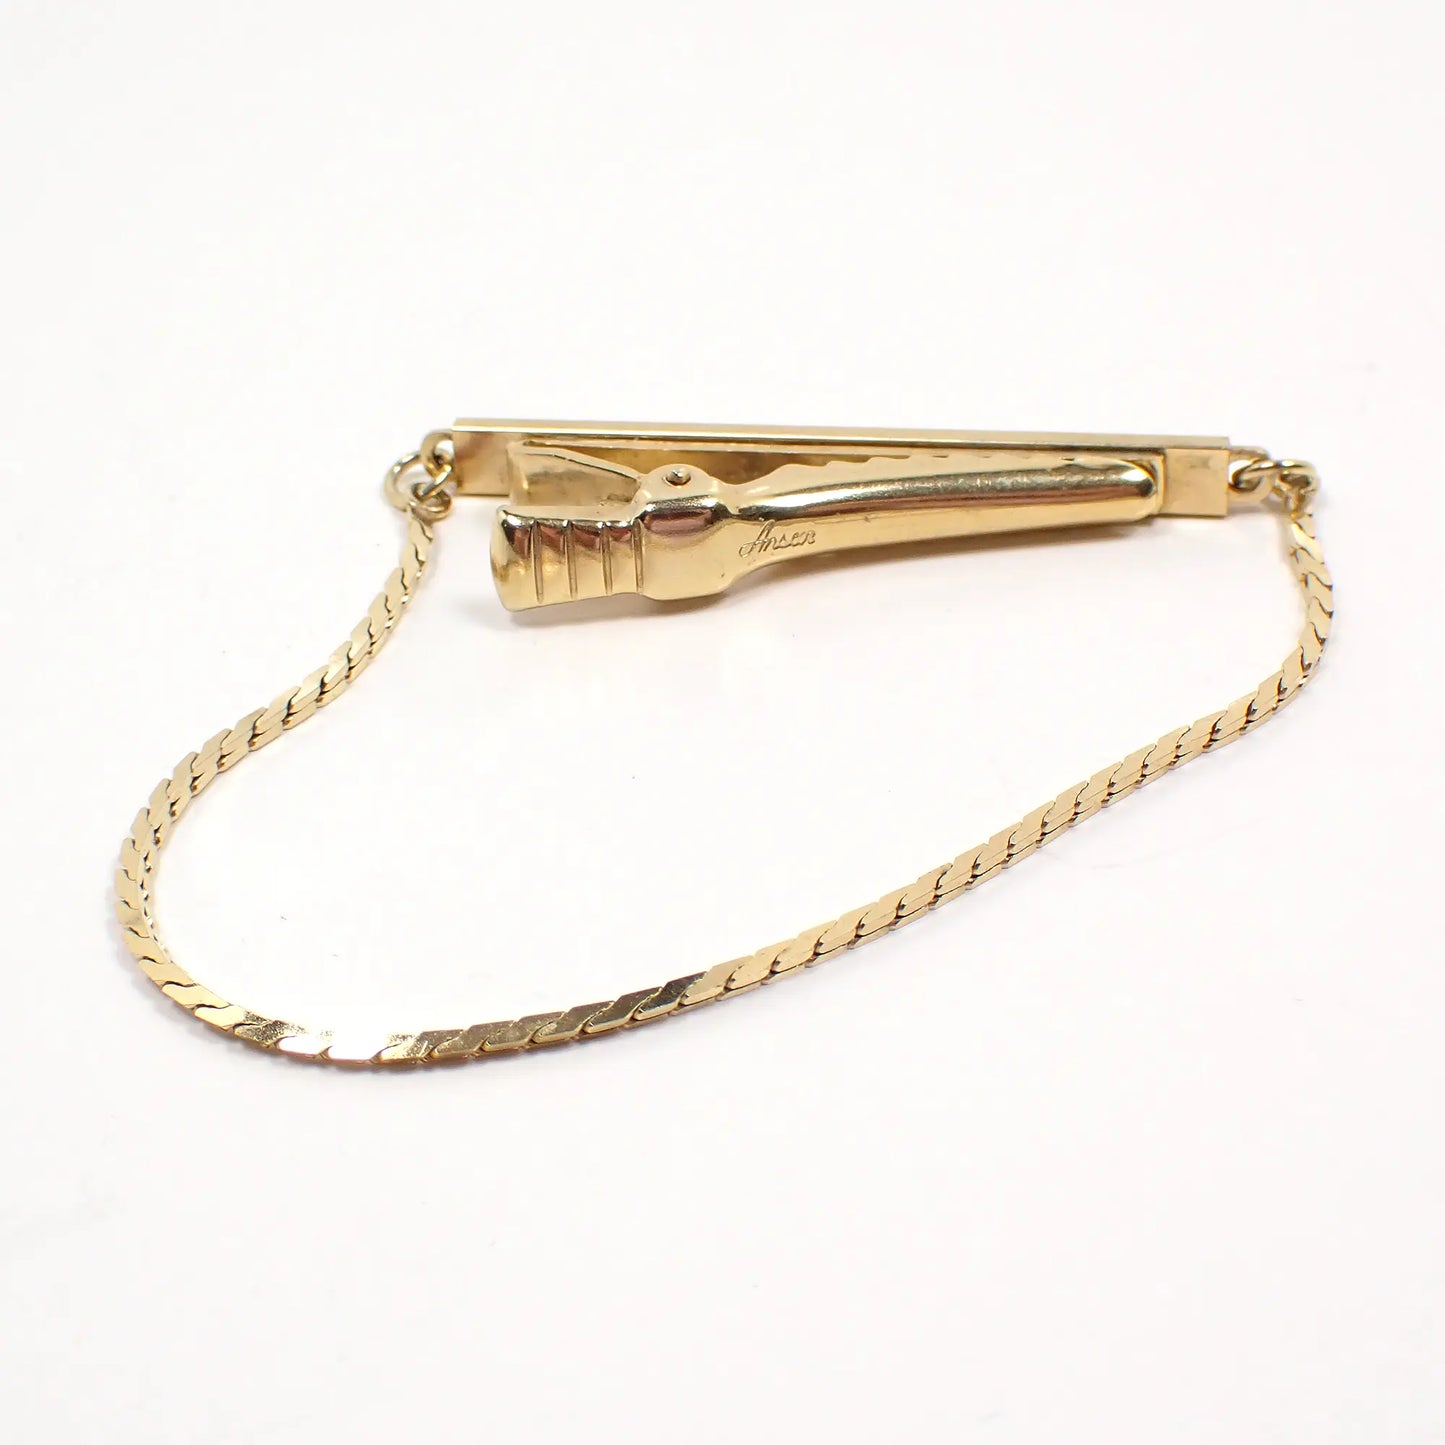 Anson Mid Century Vintage Tie Chain Clip Clasp with Sliding Adjustable Length Sides